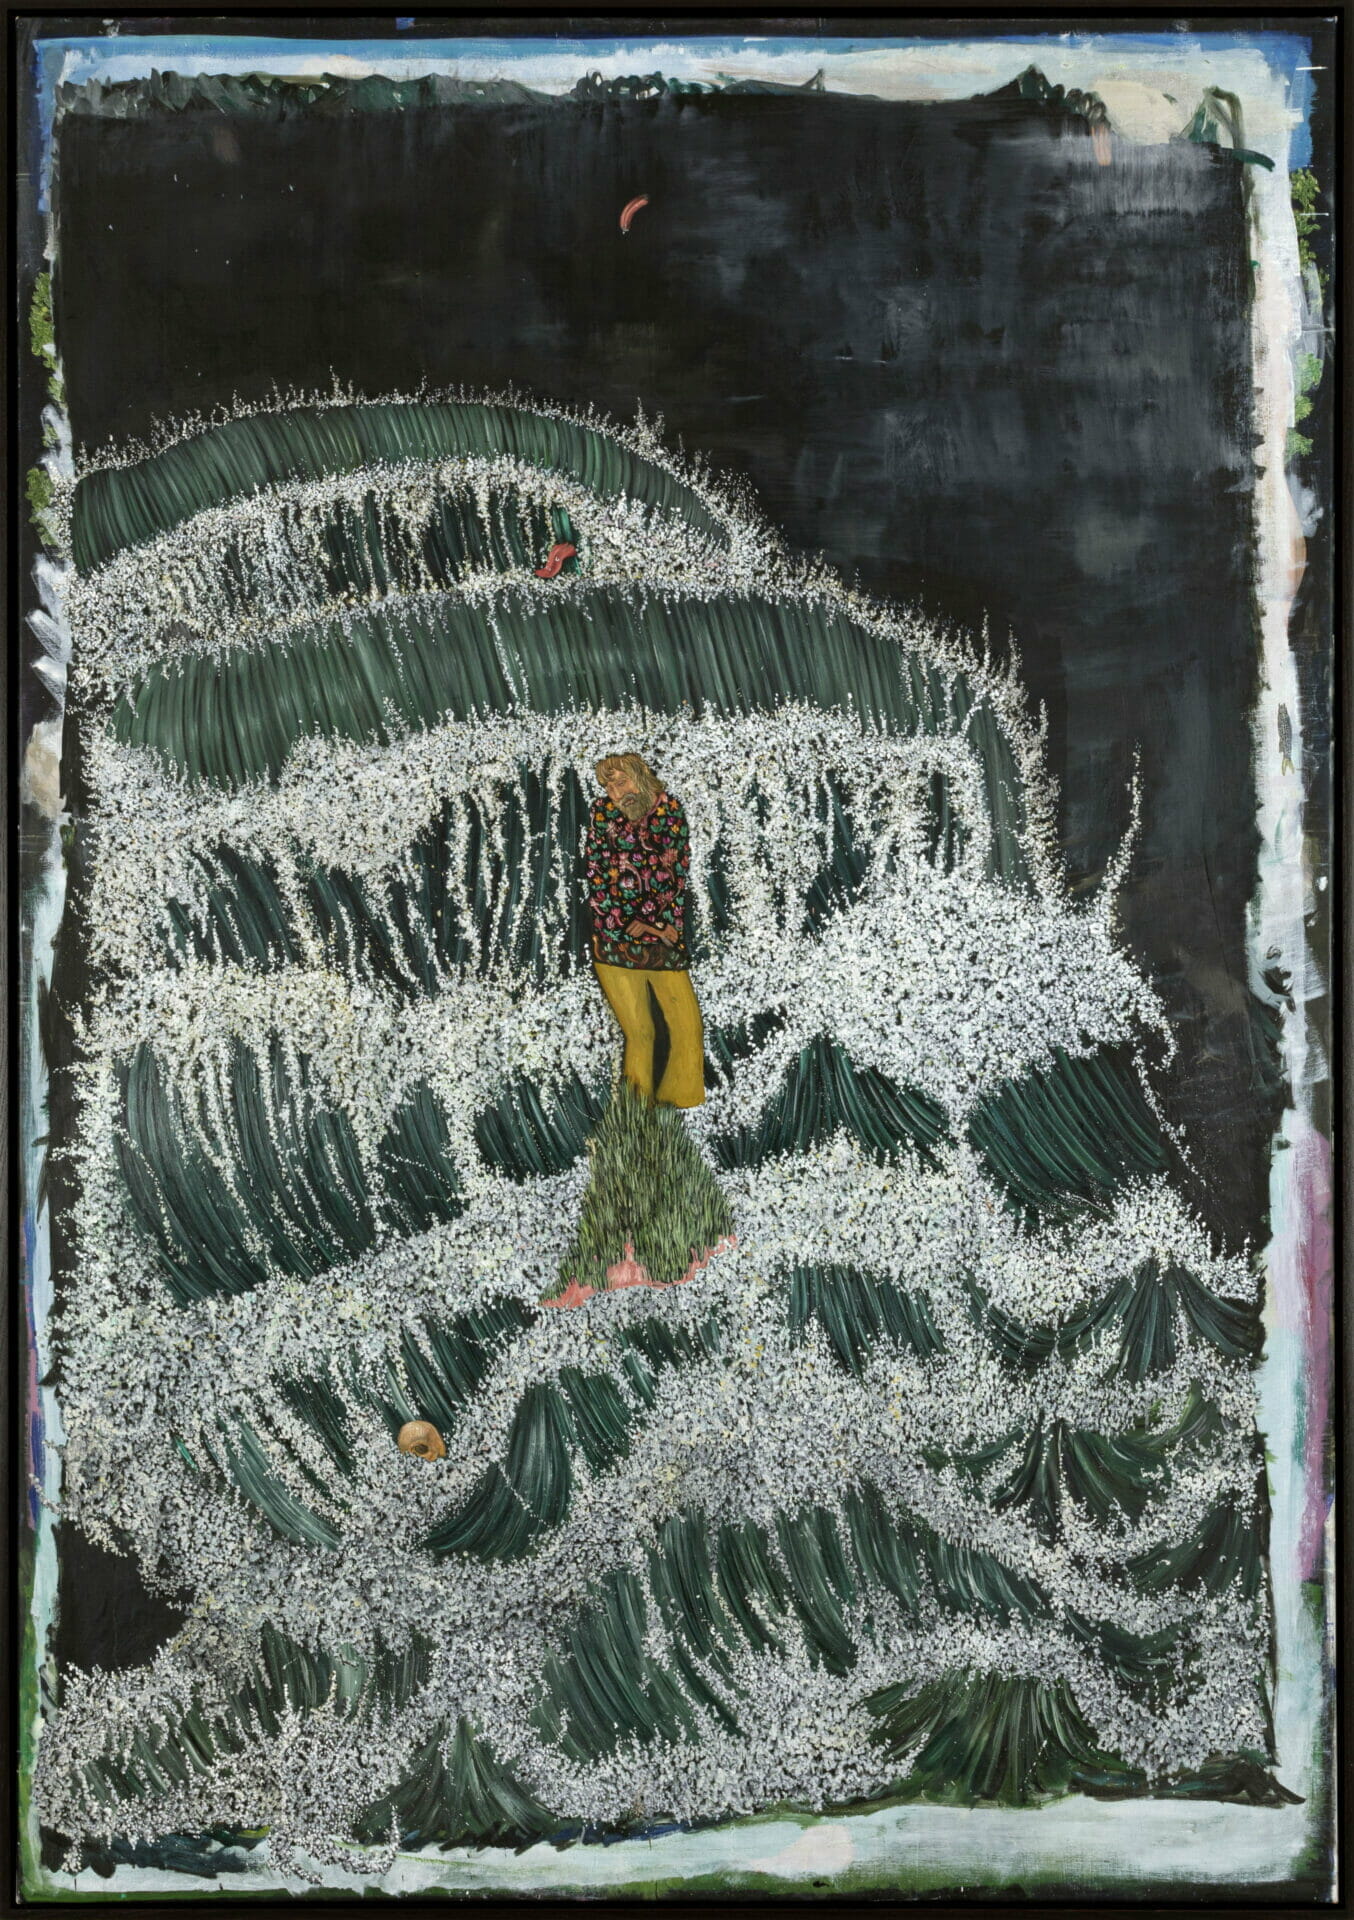 The Wild Onrush of the Waves, 2019 - 2021 oil on canvas 179 x 124,5 cm